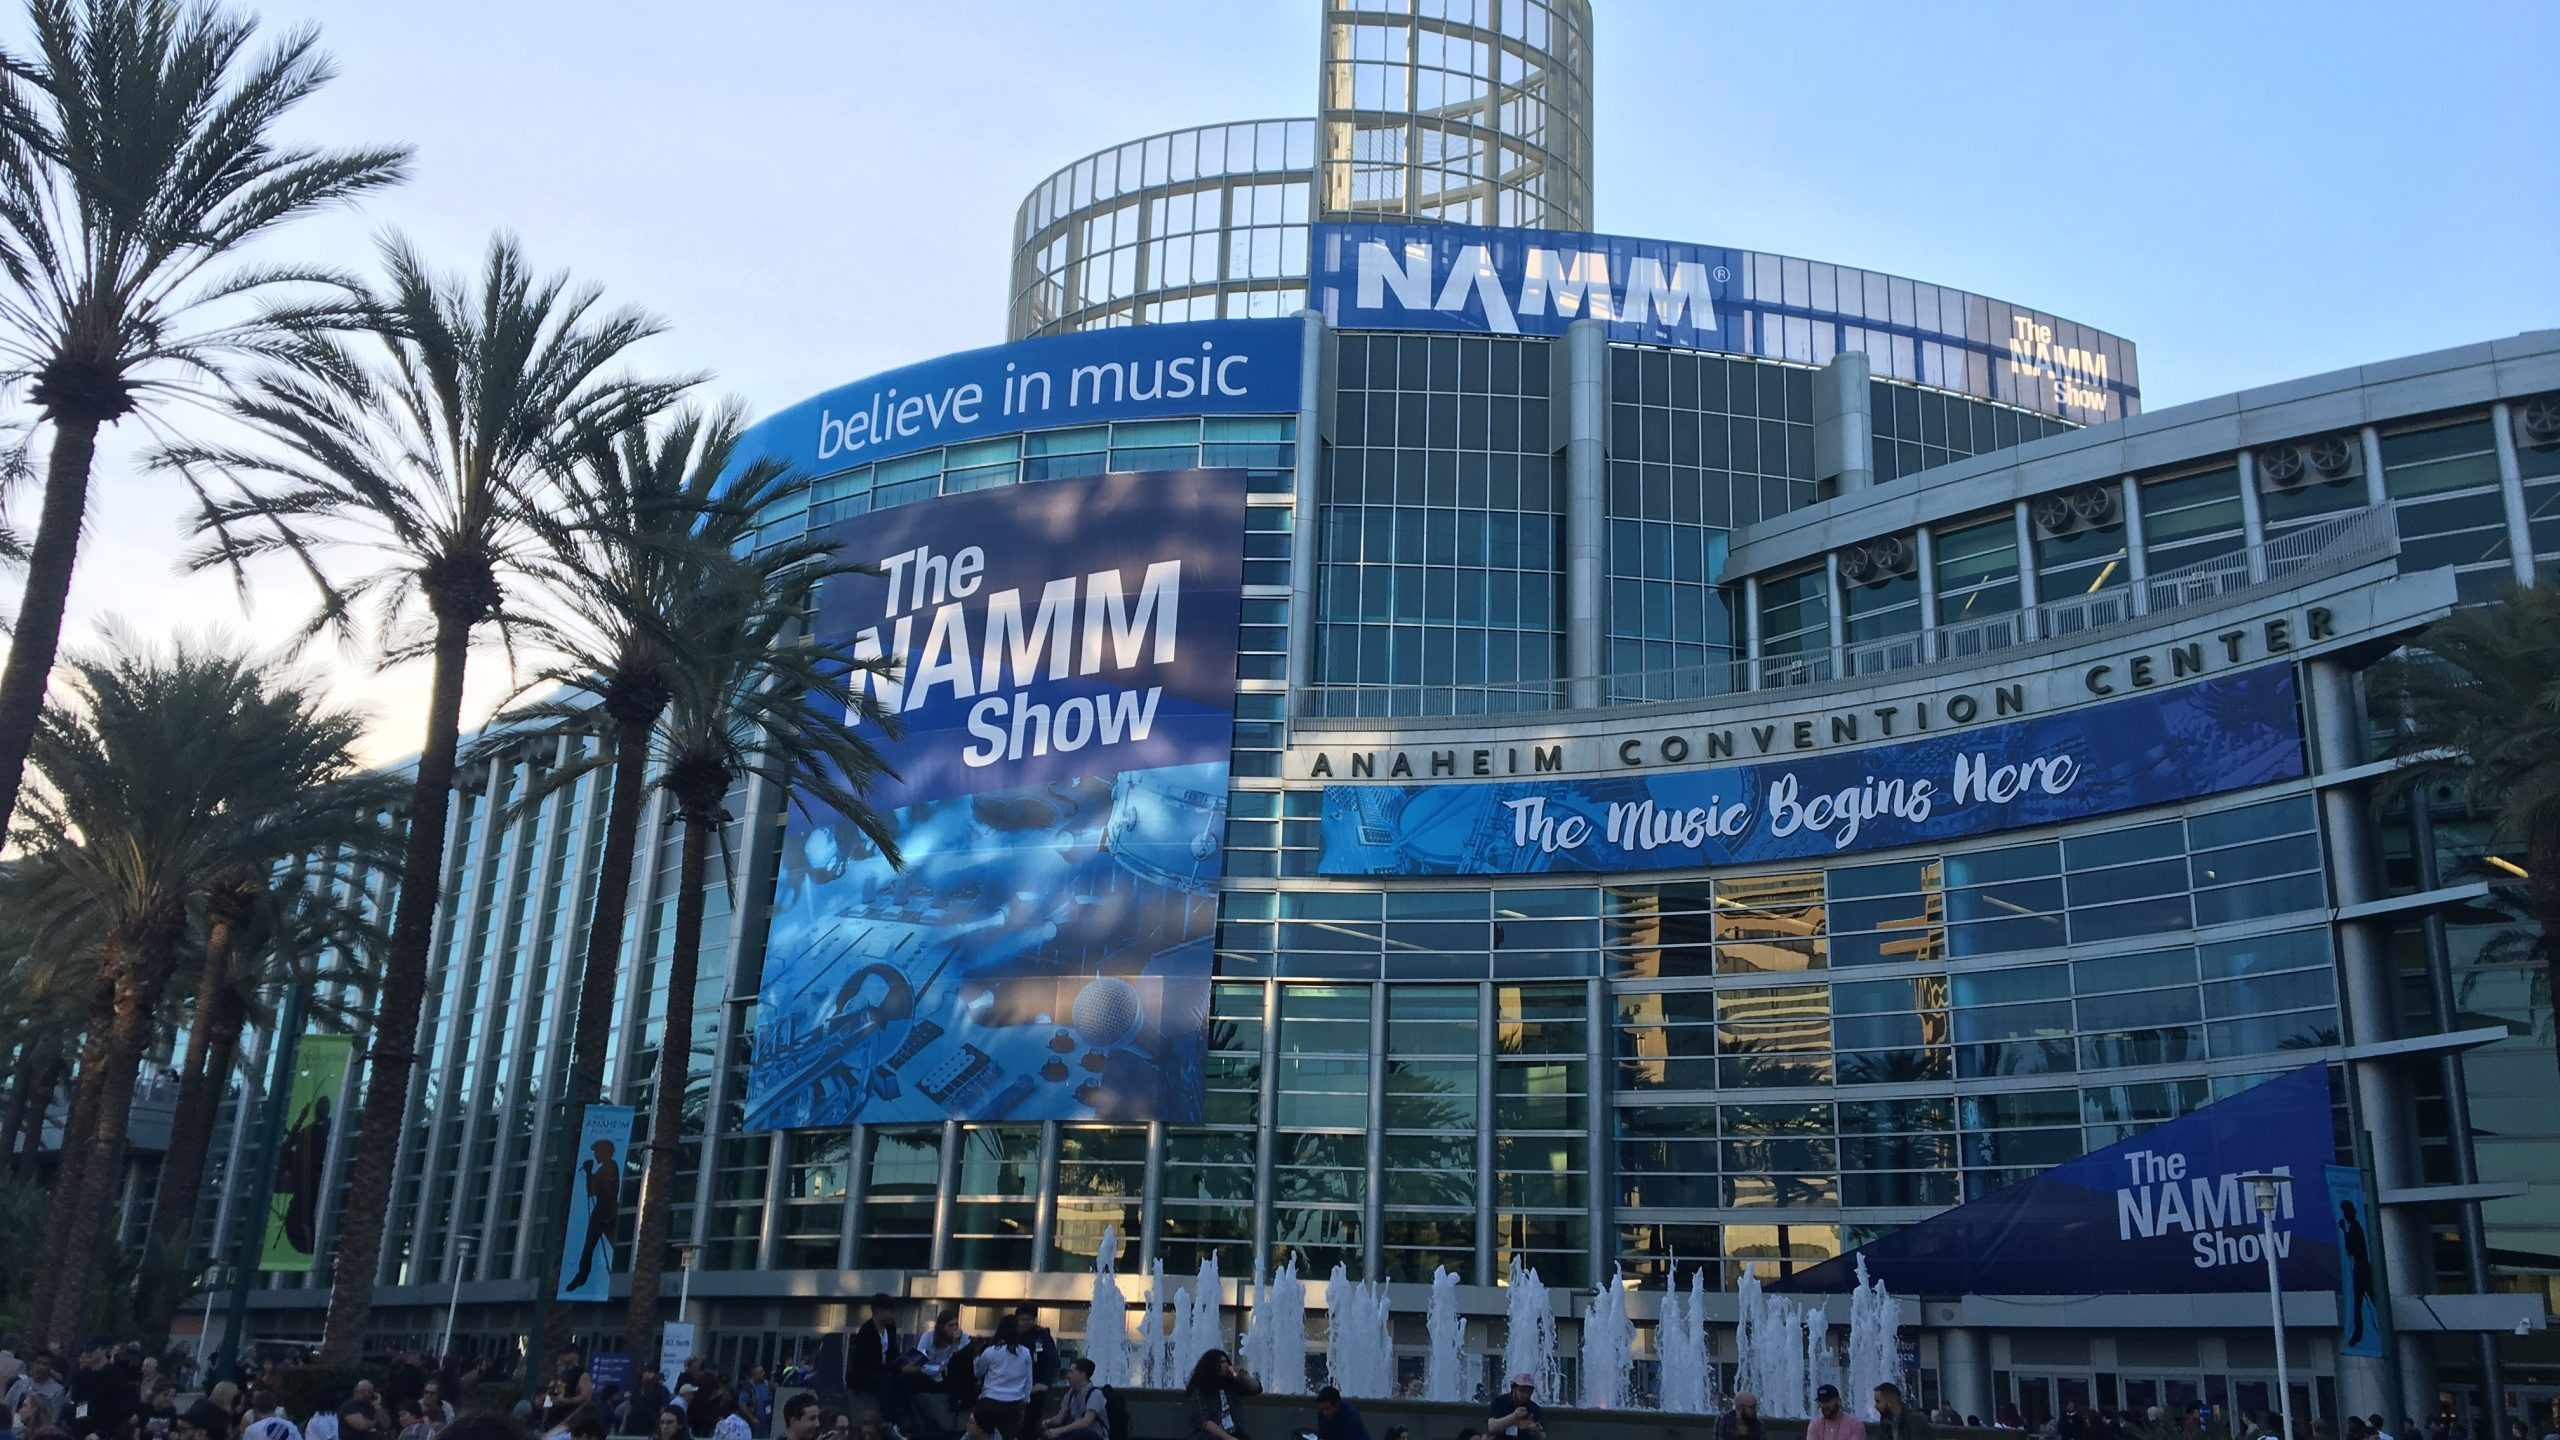 NAMM 2022 - The biggest music trade show